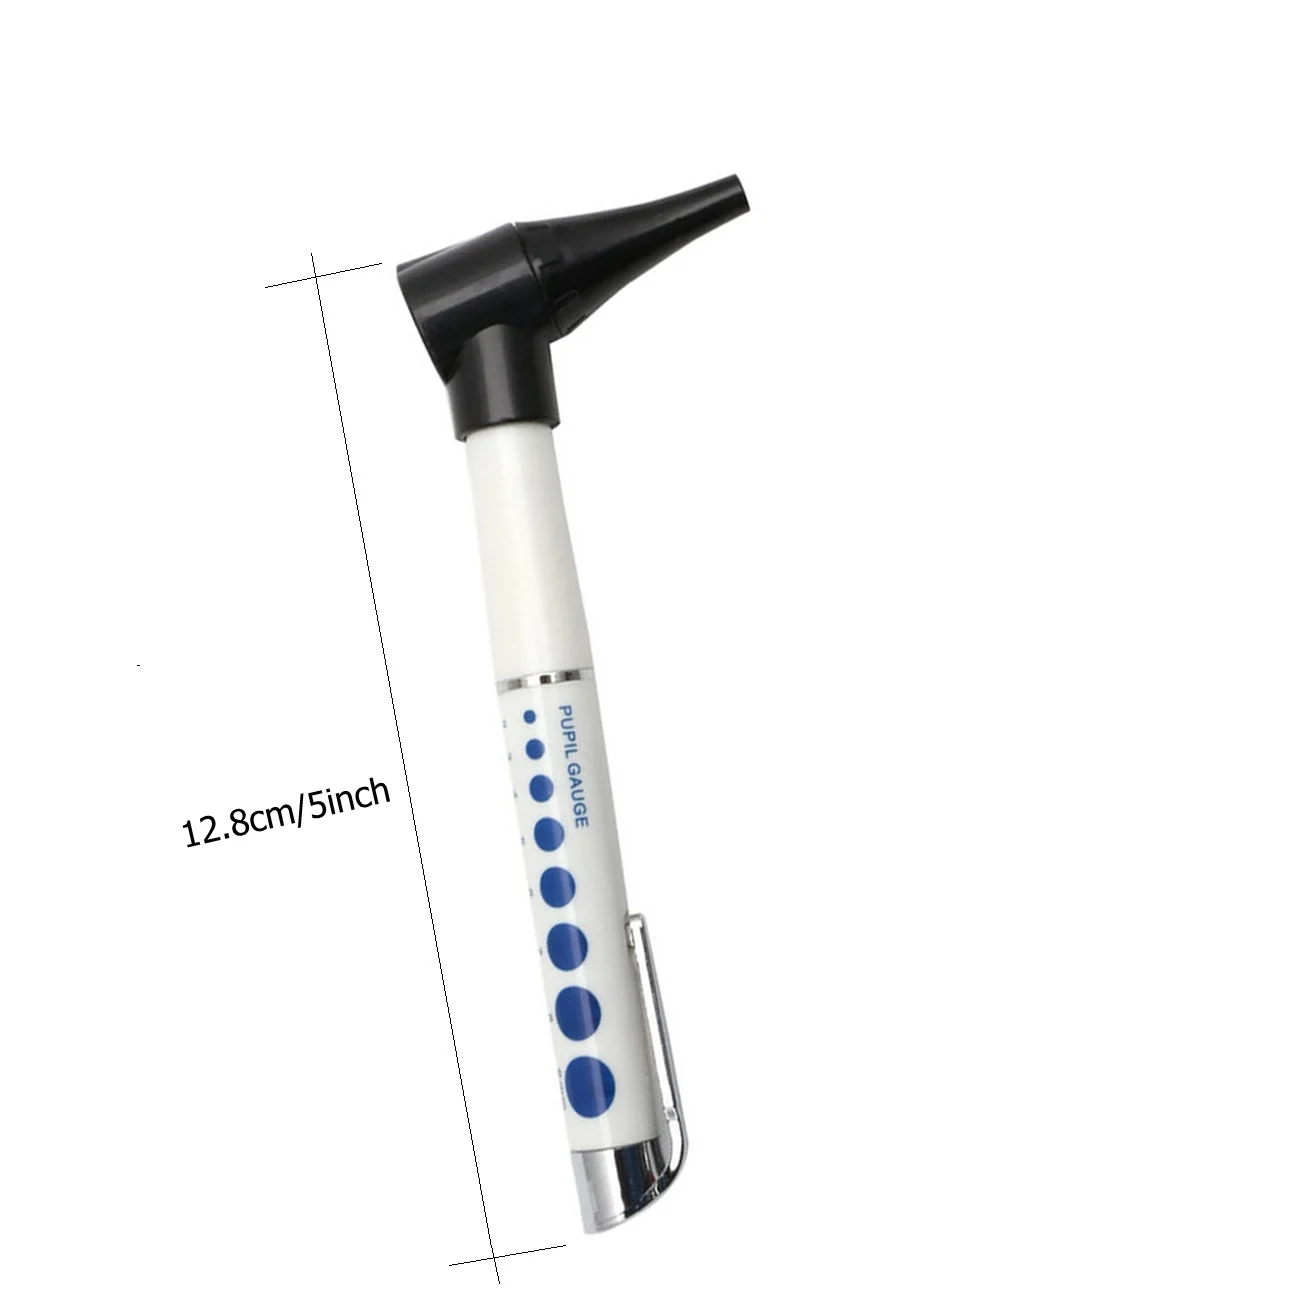 Medical Otoscope Medical Ear Otoscope Ophthalmoscope Pen Medical Ear Light Ear Magnifier Ear Cleaner Set Clinical Diagnostic 6